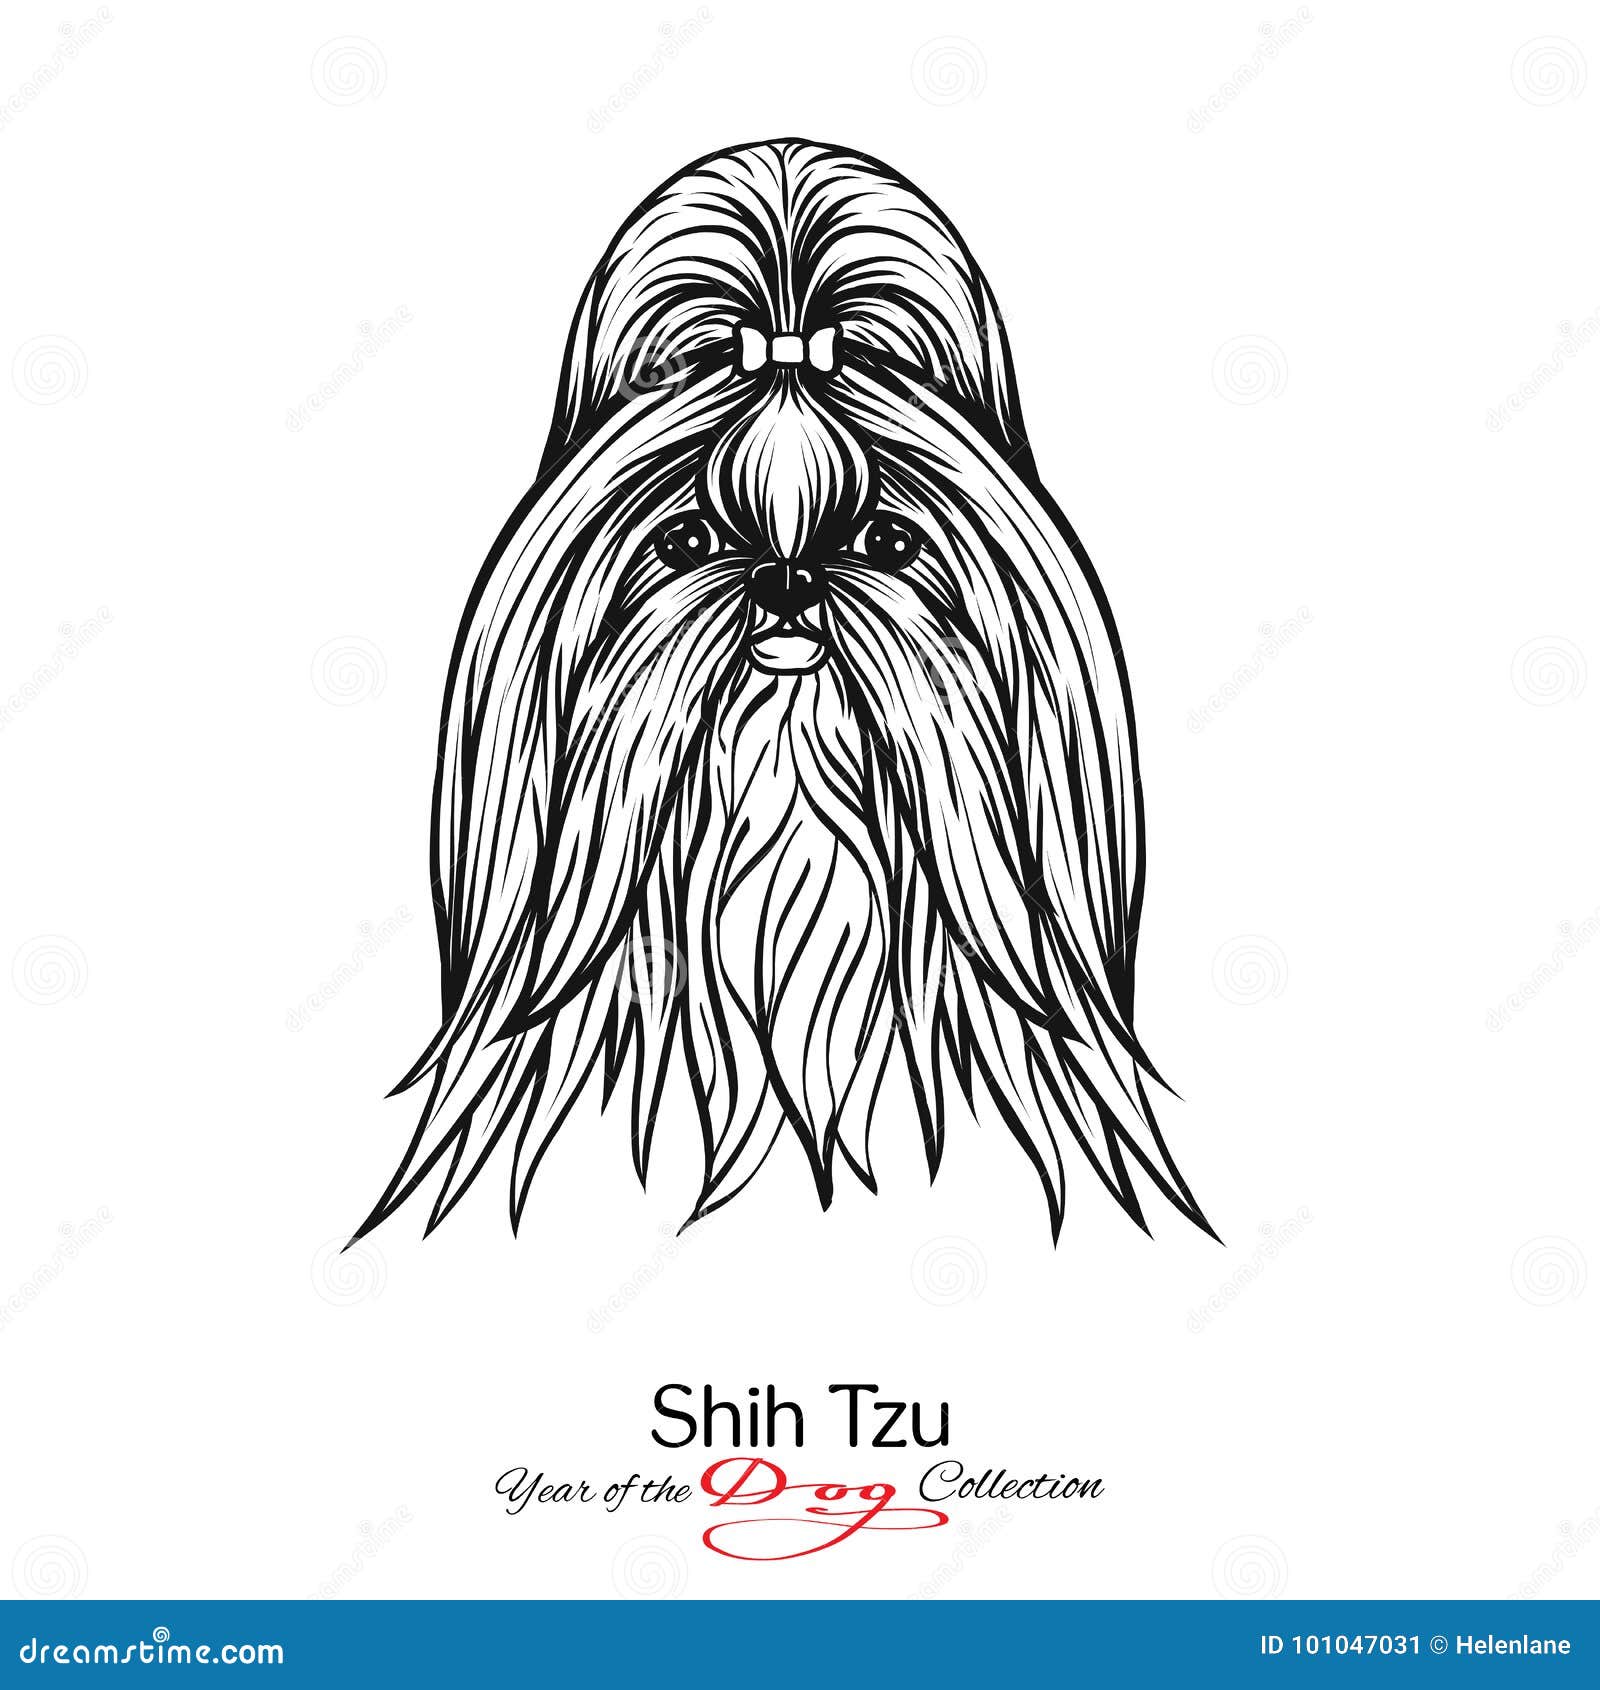 Shih Tzu. Black And White Graphic Drawing Of A Dog. Stock